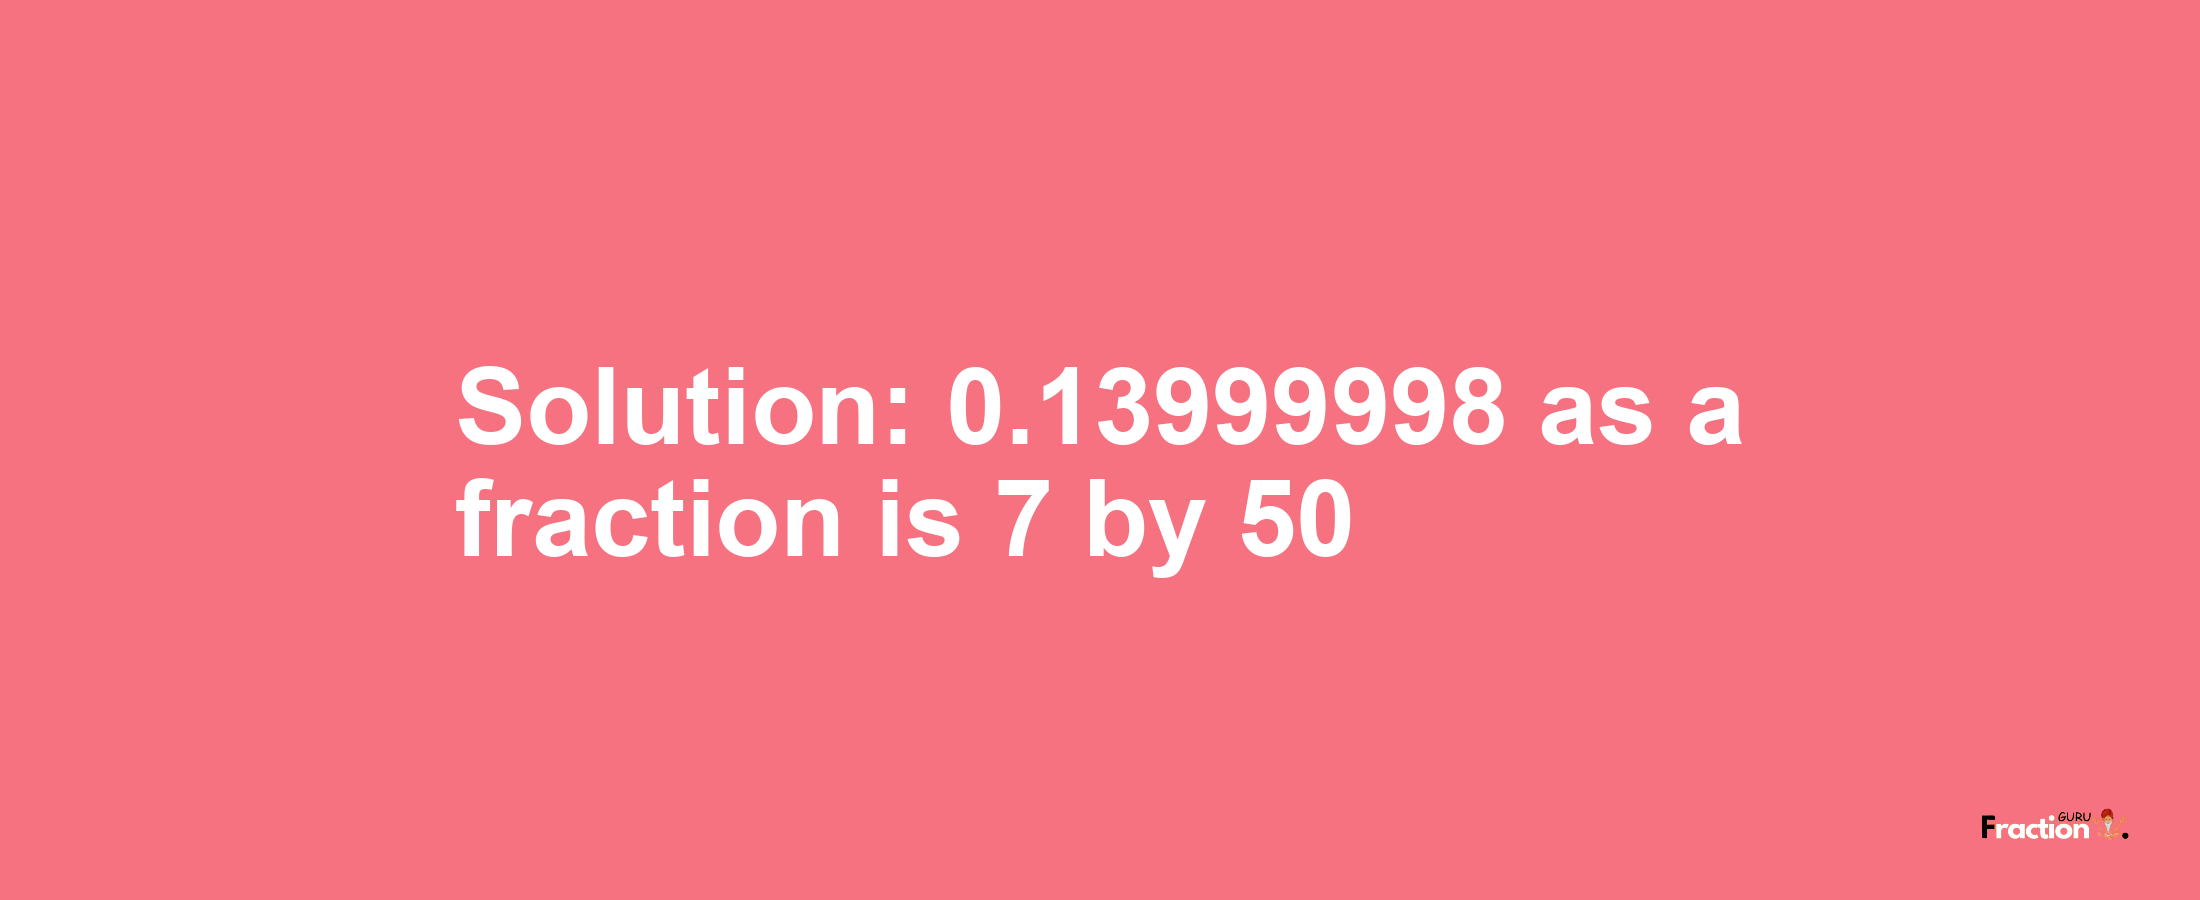 Solution:0.13999998 as a fraction is 7/50